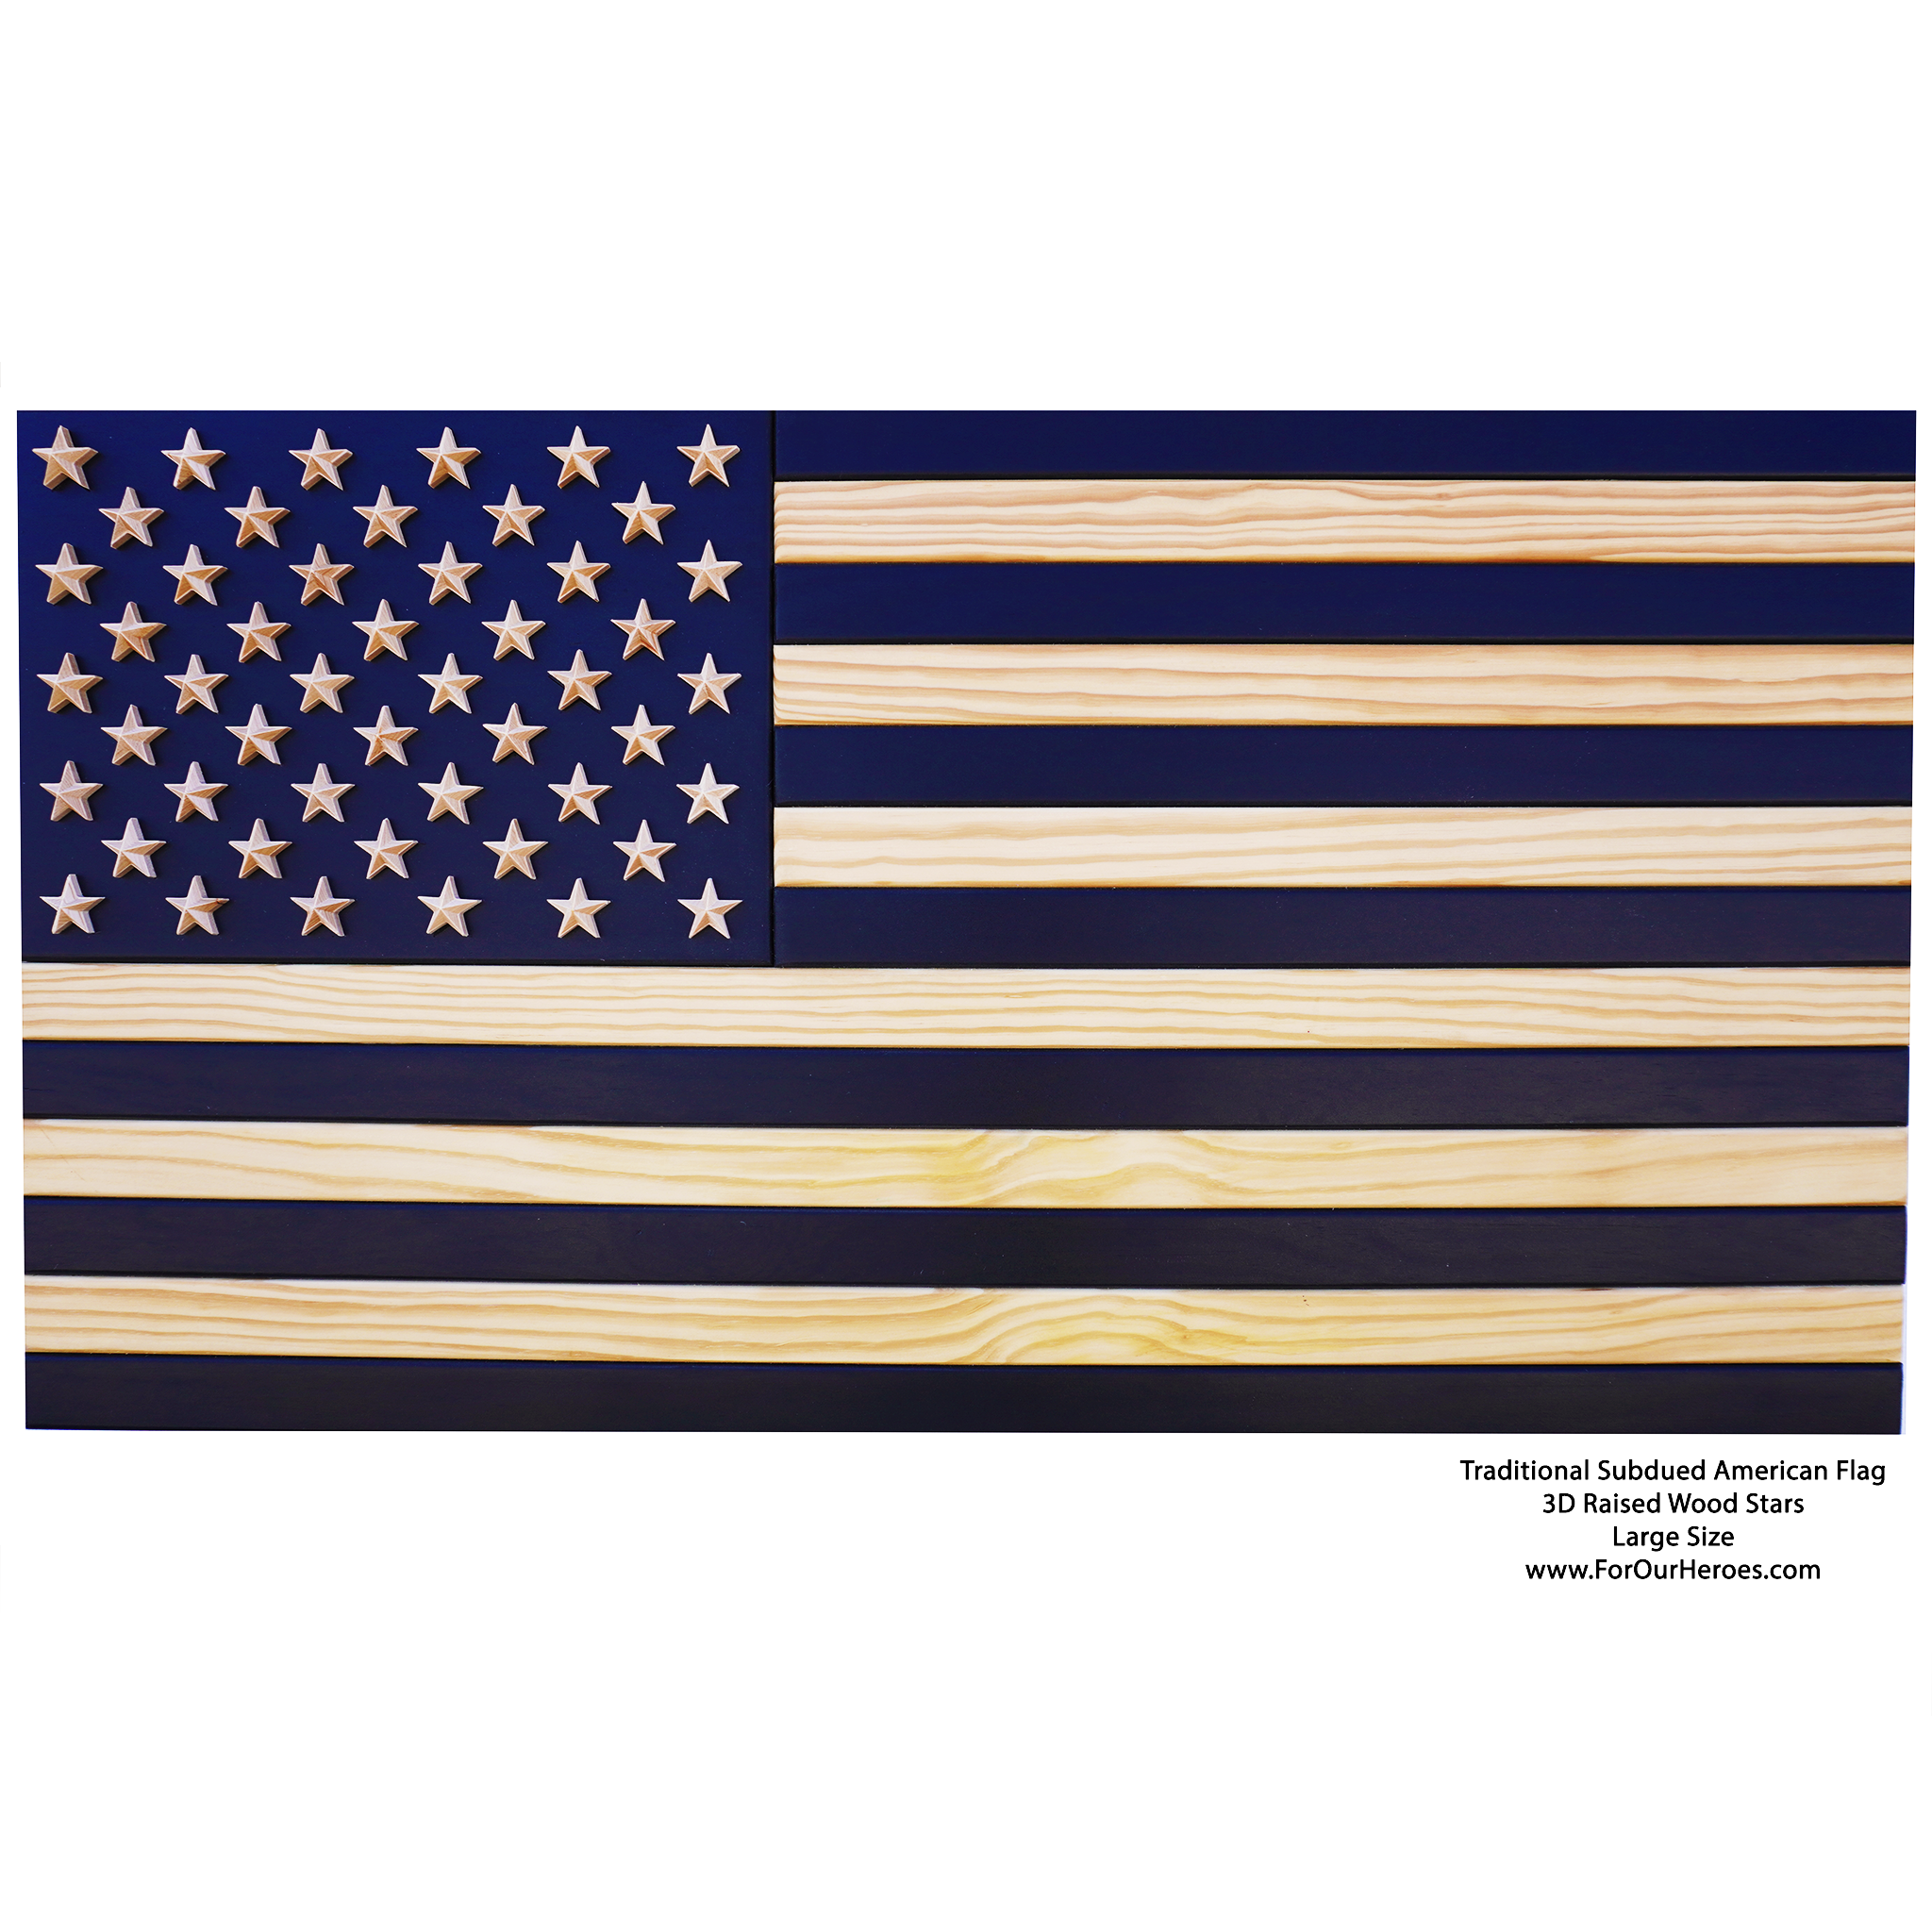 2D TRADITIONAL SUBDUED American Flag (TRUE 3D Raised Stars)